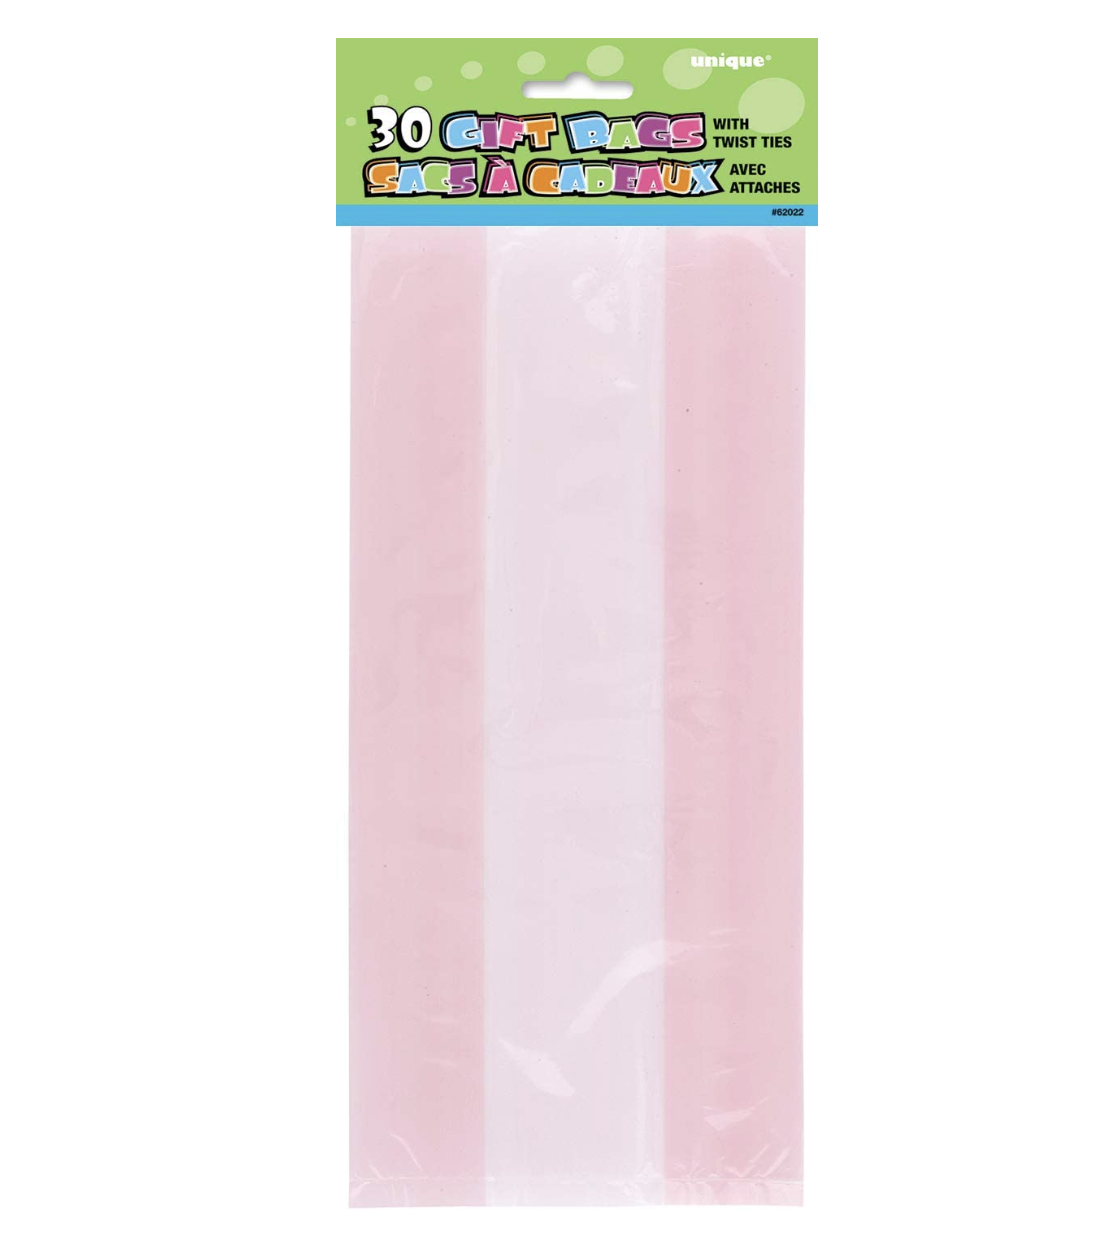 Baby Pink Cellophane Bags 30ct